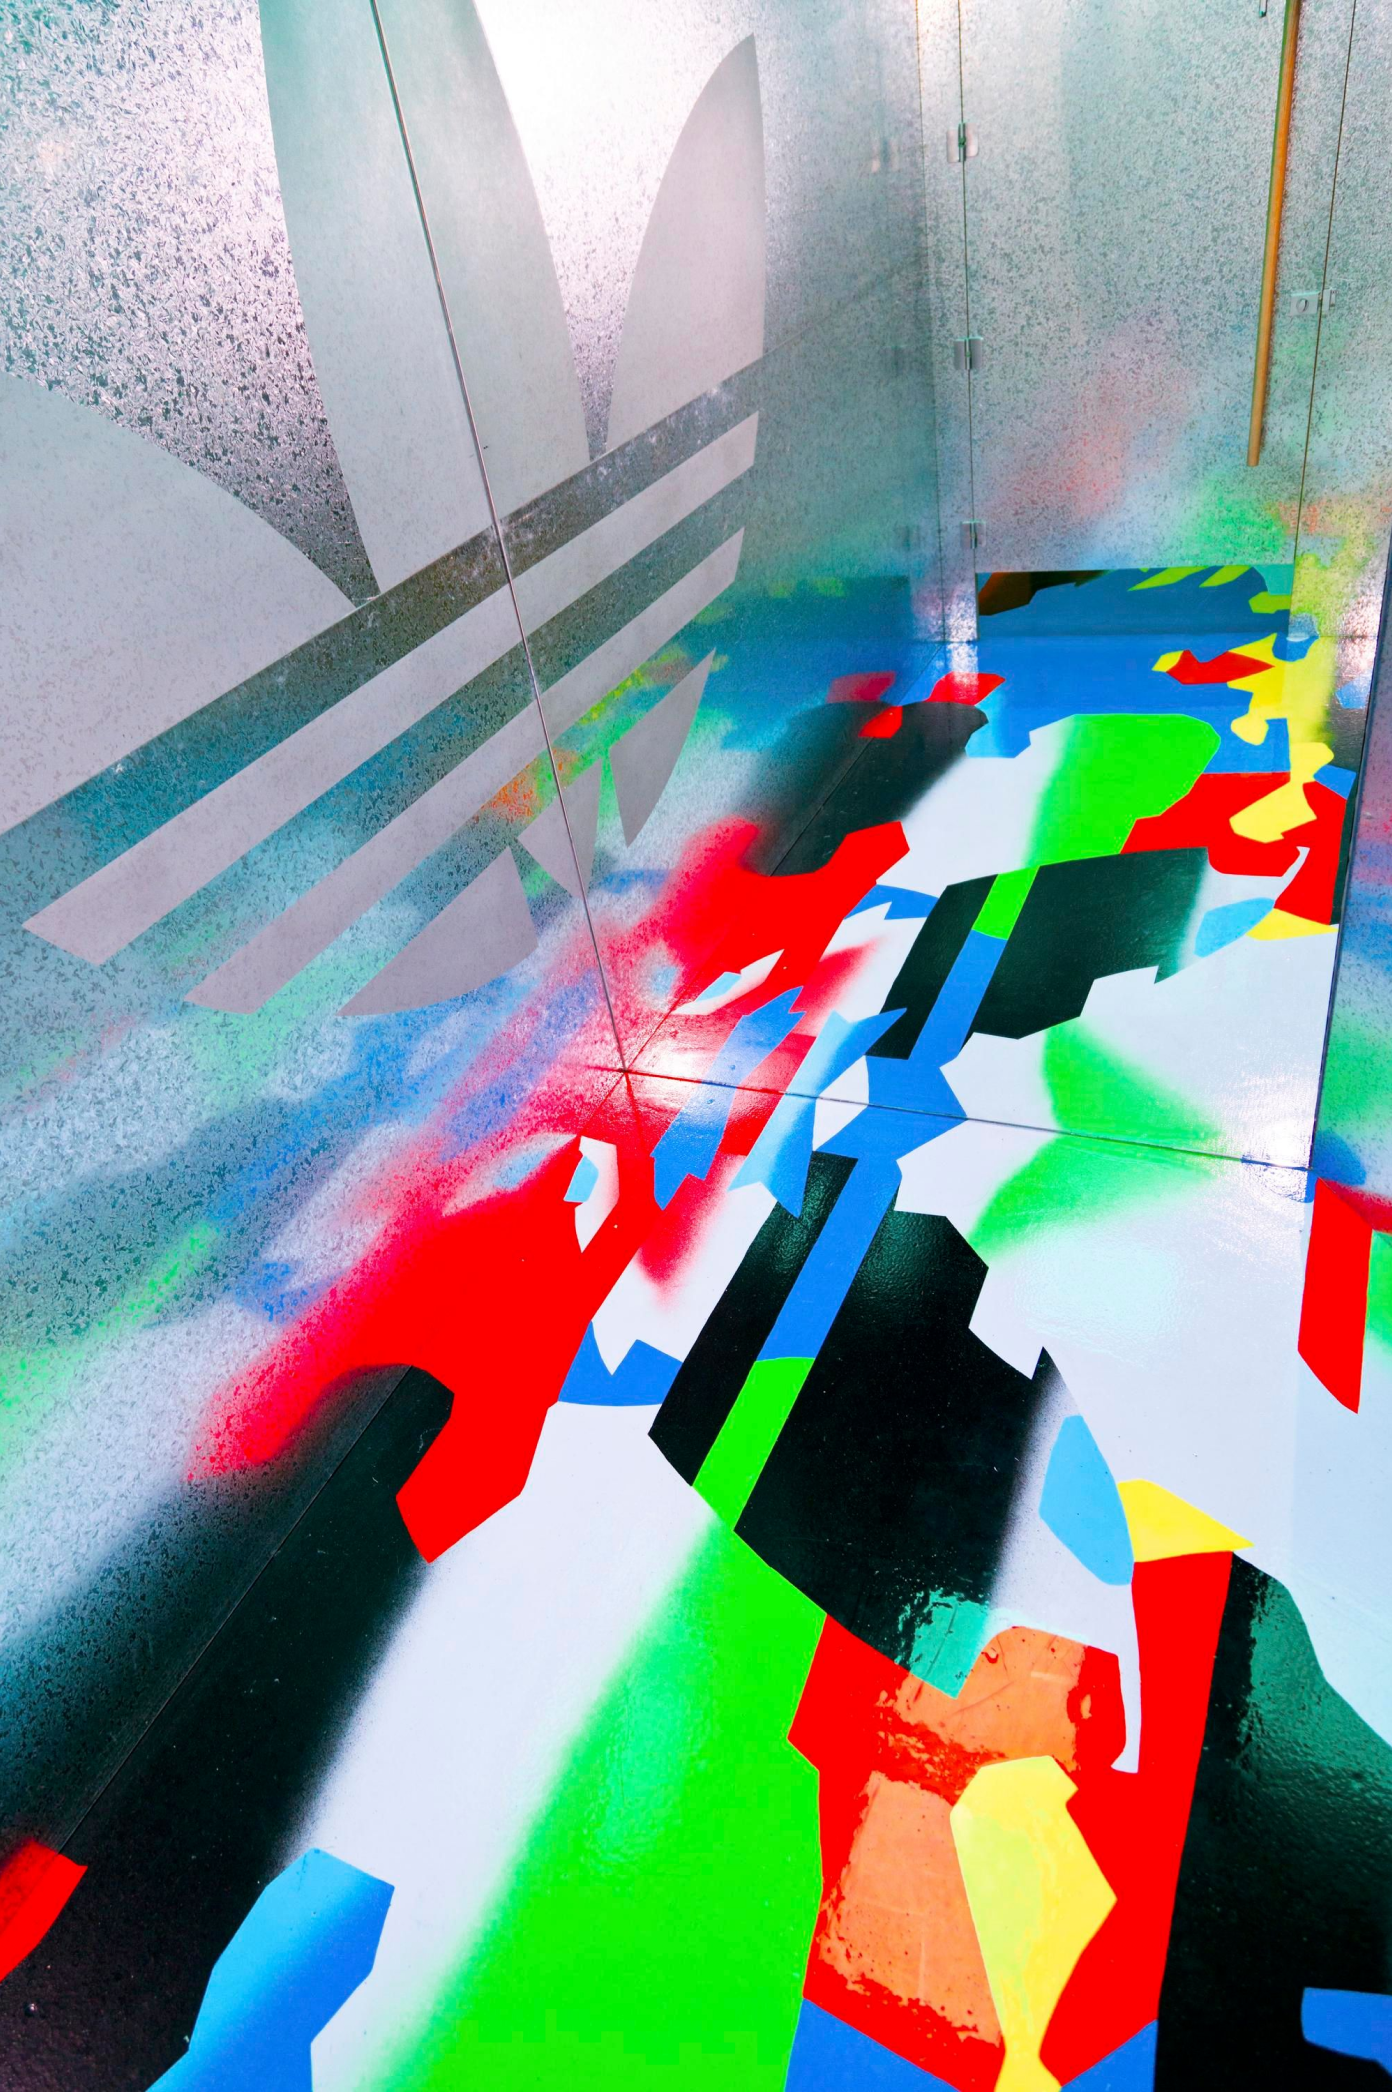 A colourfully painted floor artwork for Adidas